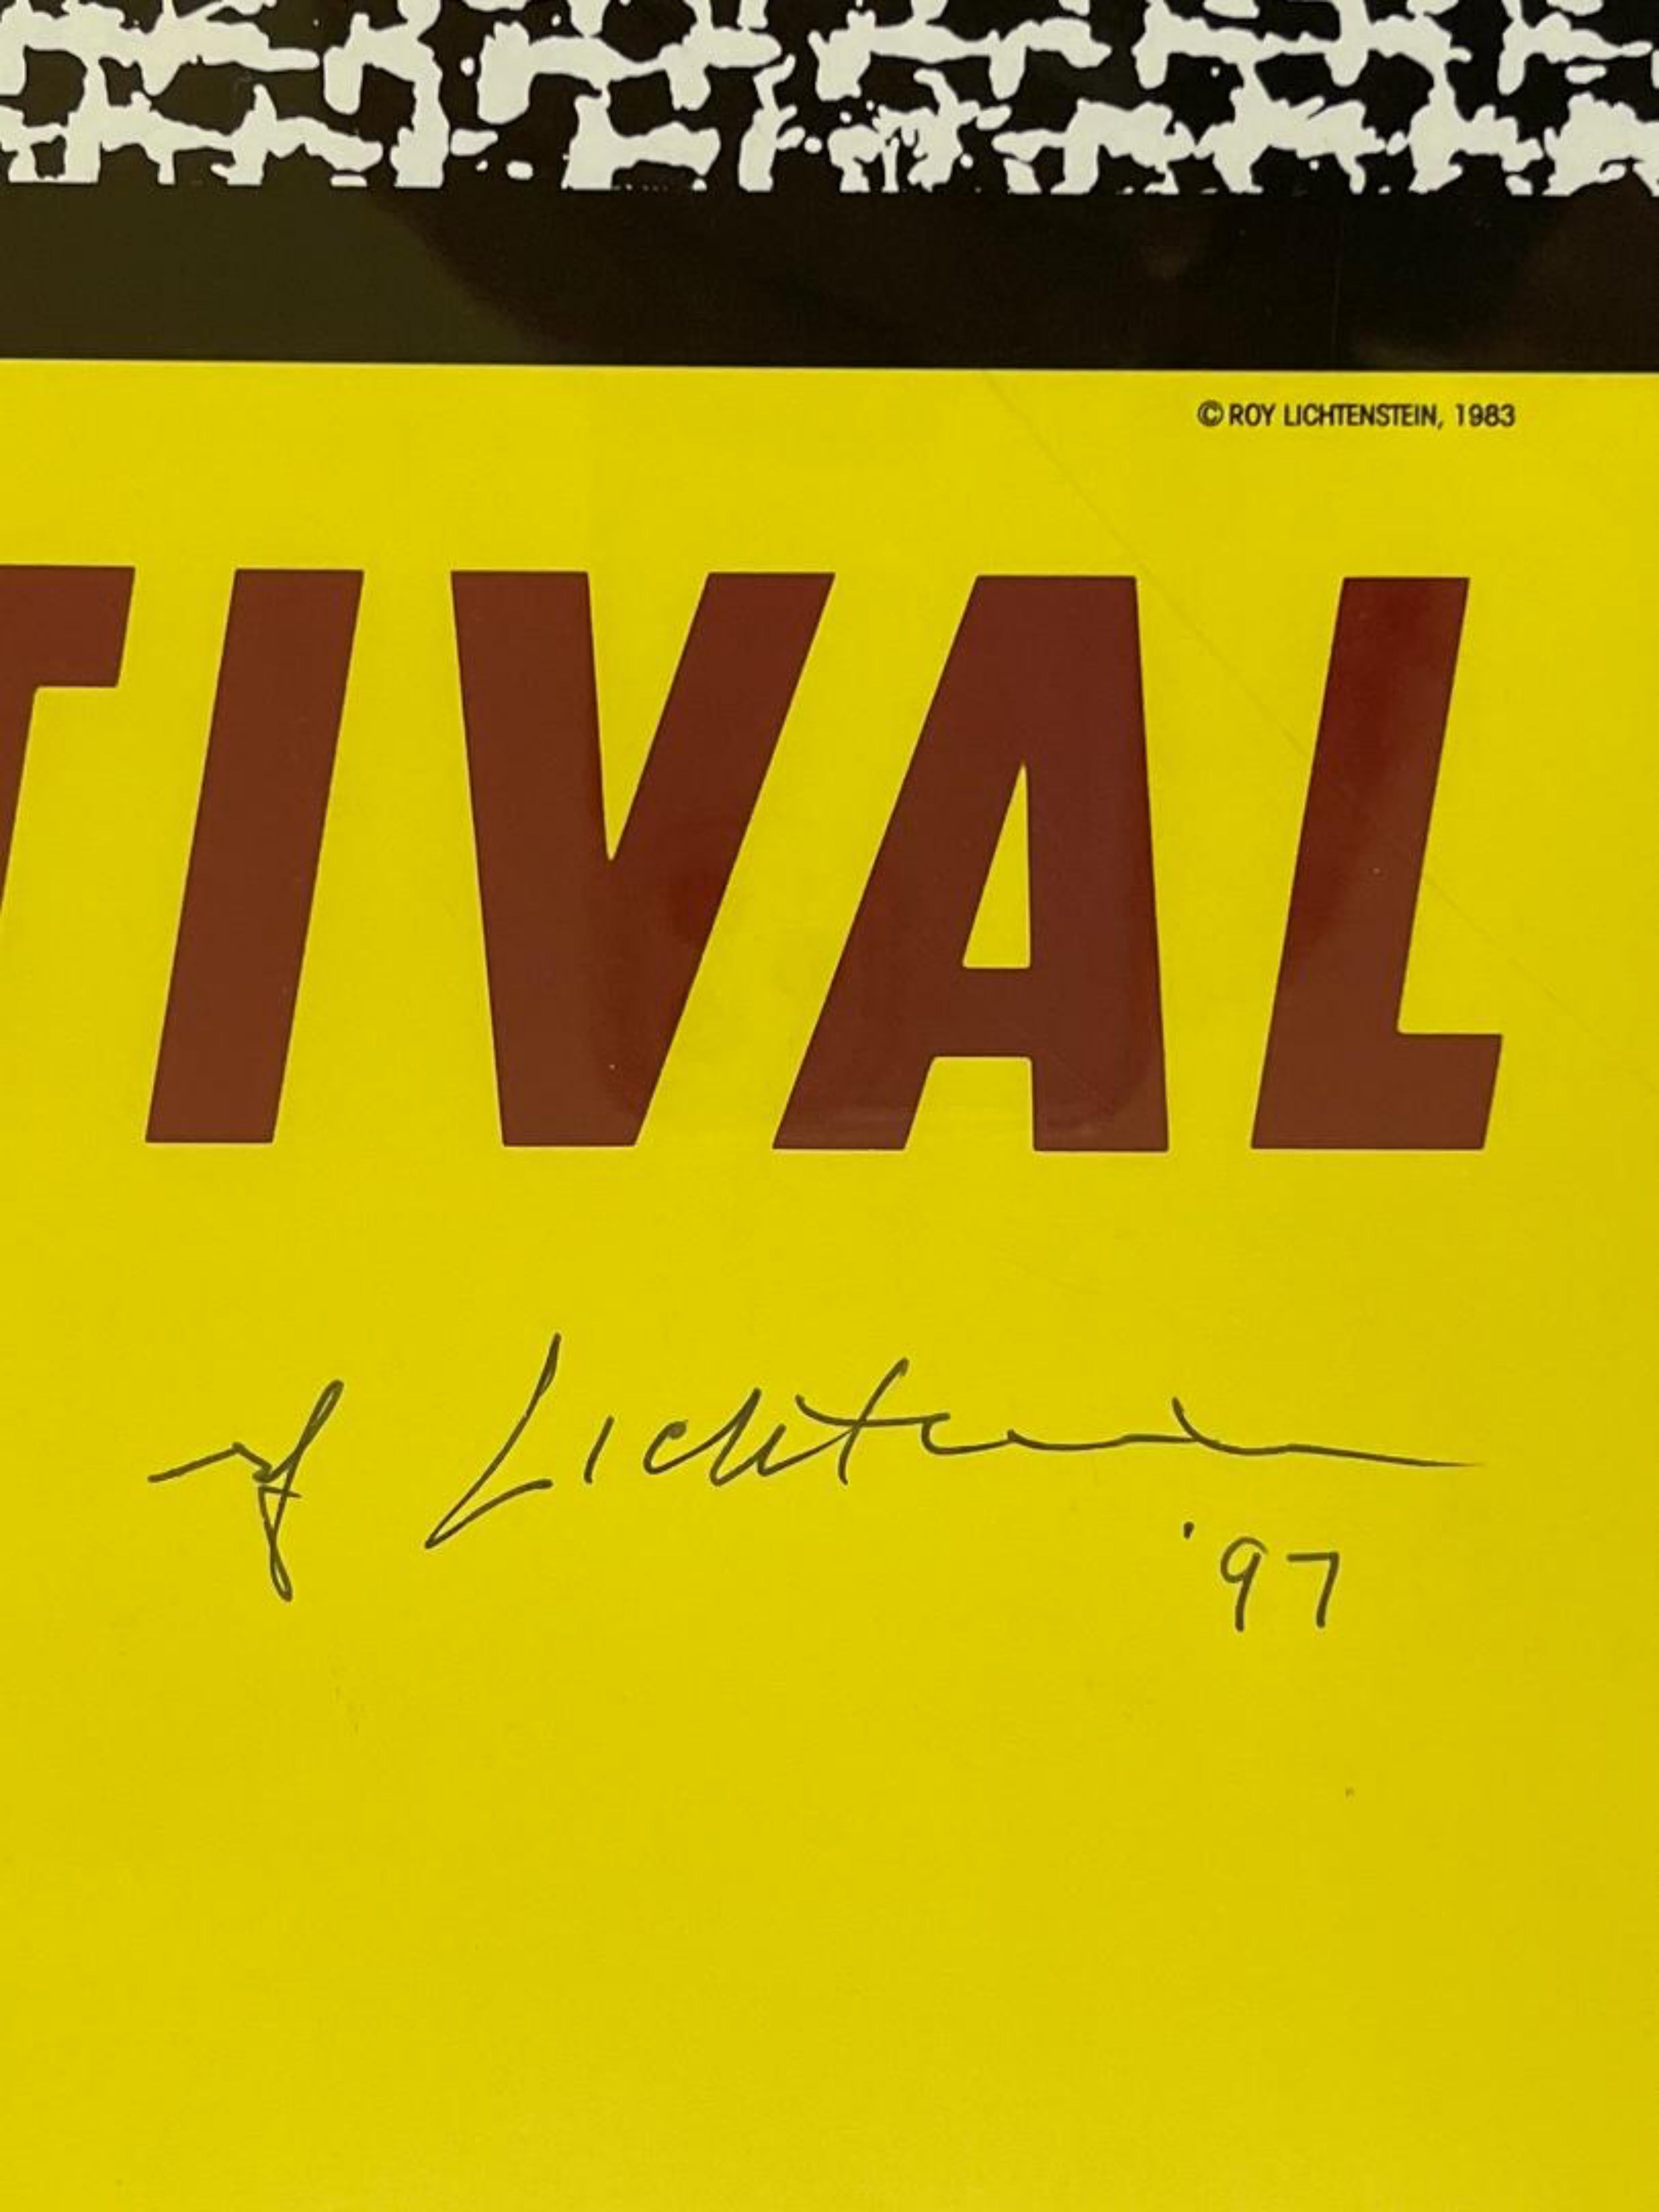 Next Wave Festival poster at BAM (Hand signed and dated '97 by Roy Lichtenstein) For Sale 1